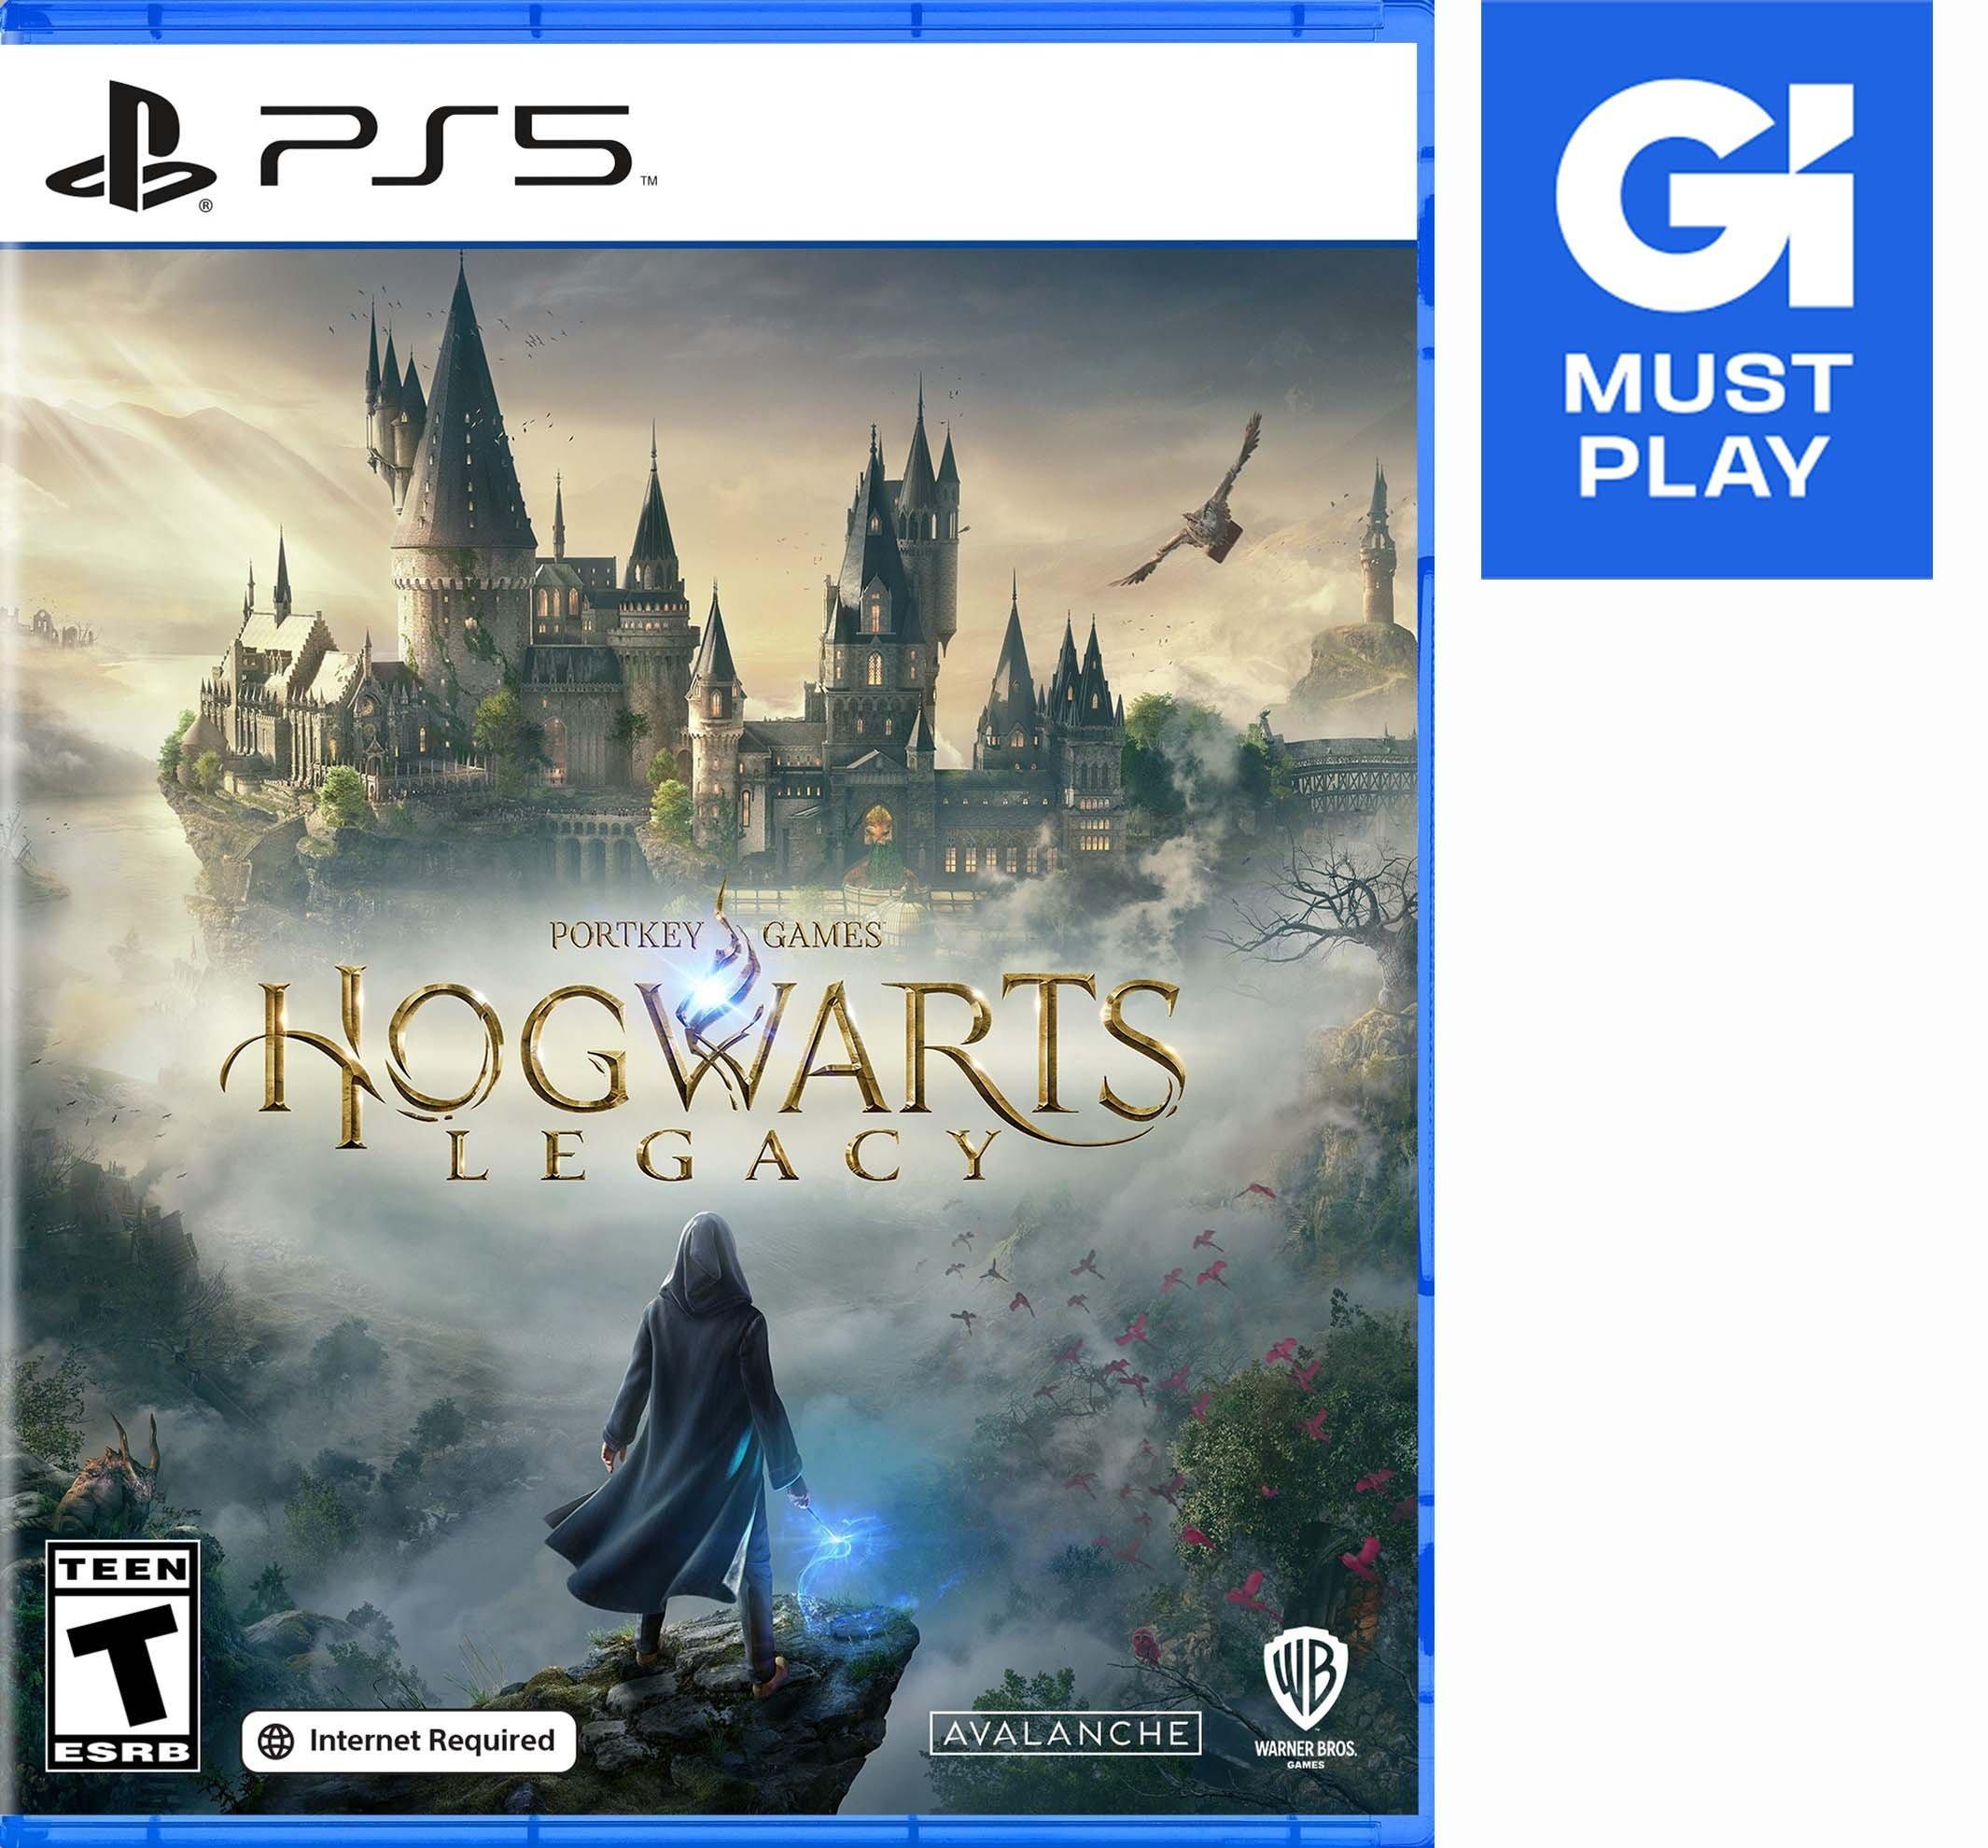 Hogwarts Legacy early access guide. How to play the game 3 days before the  release